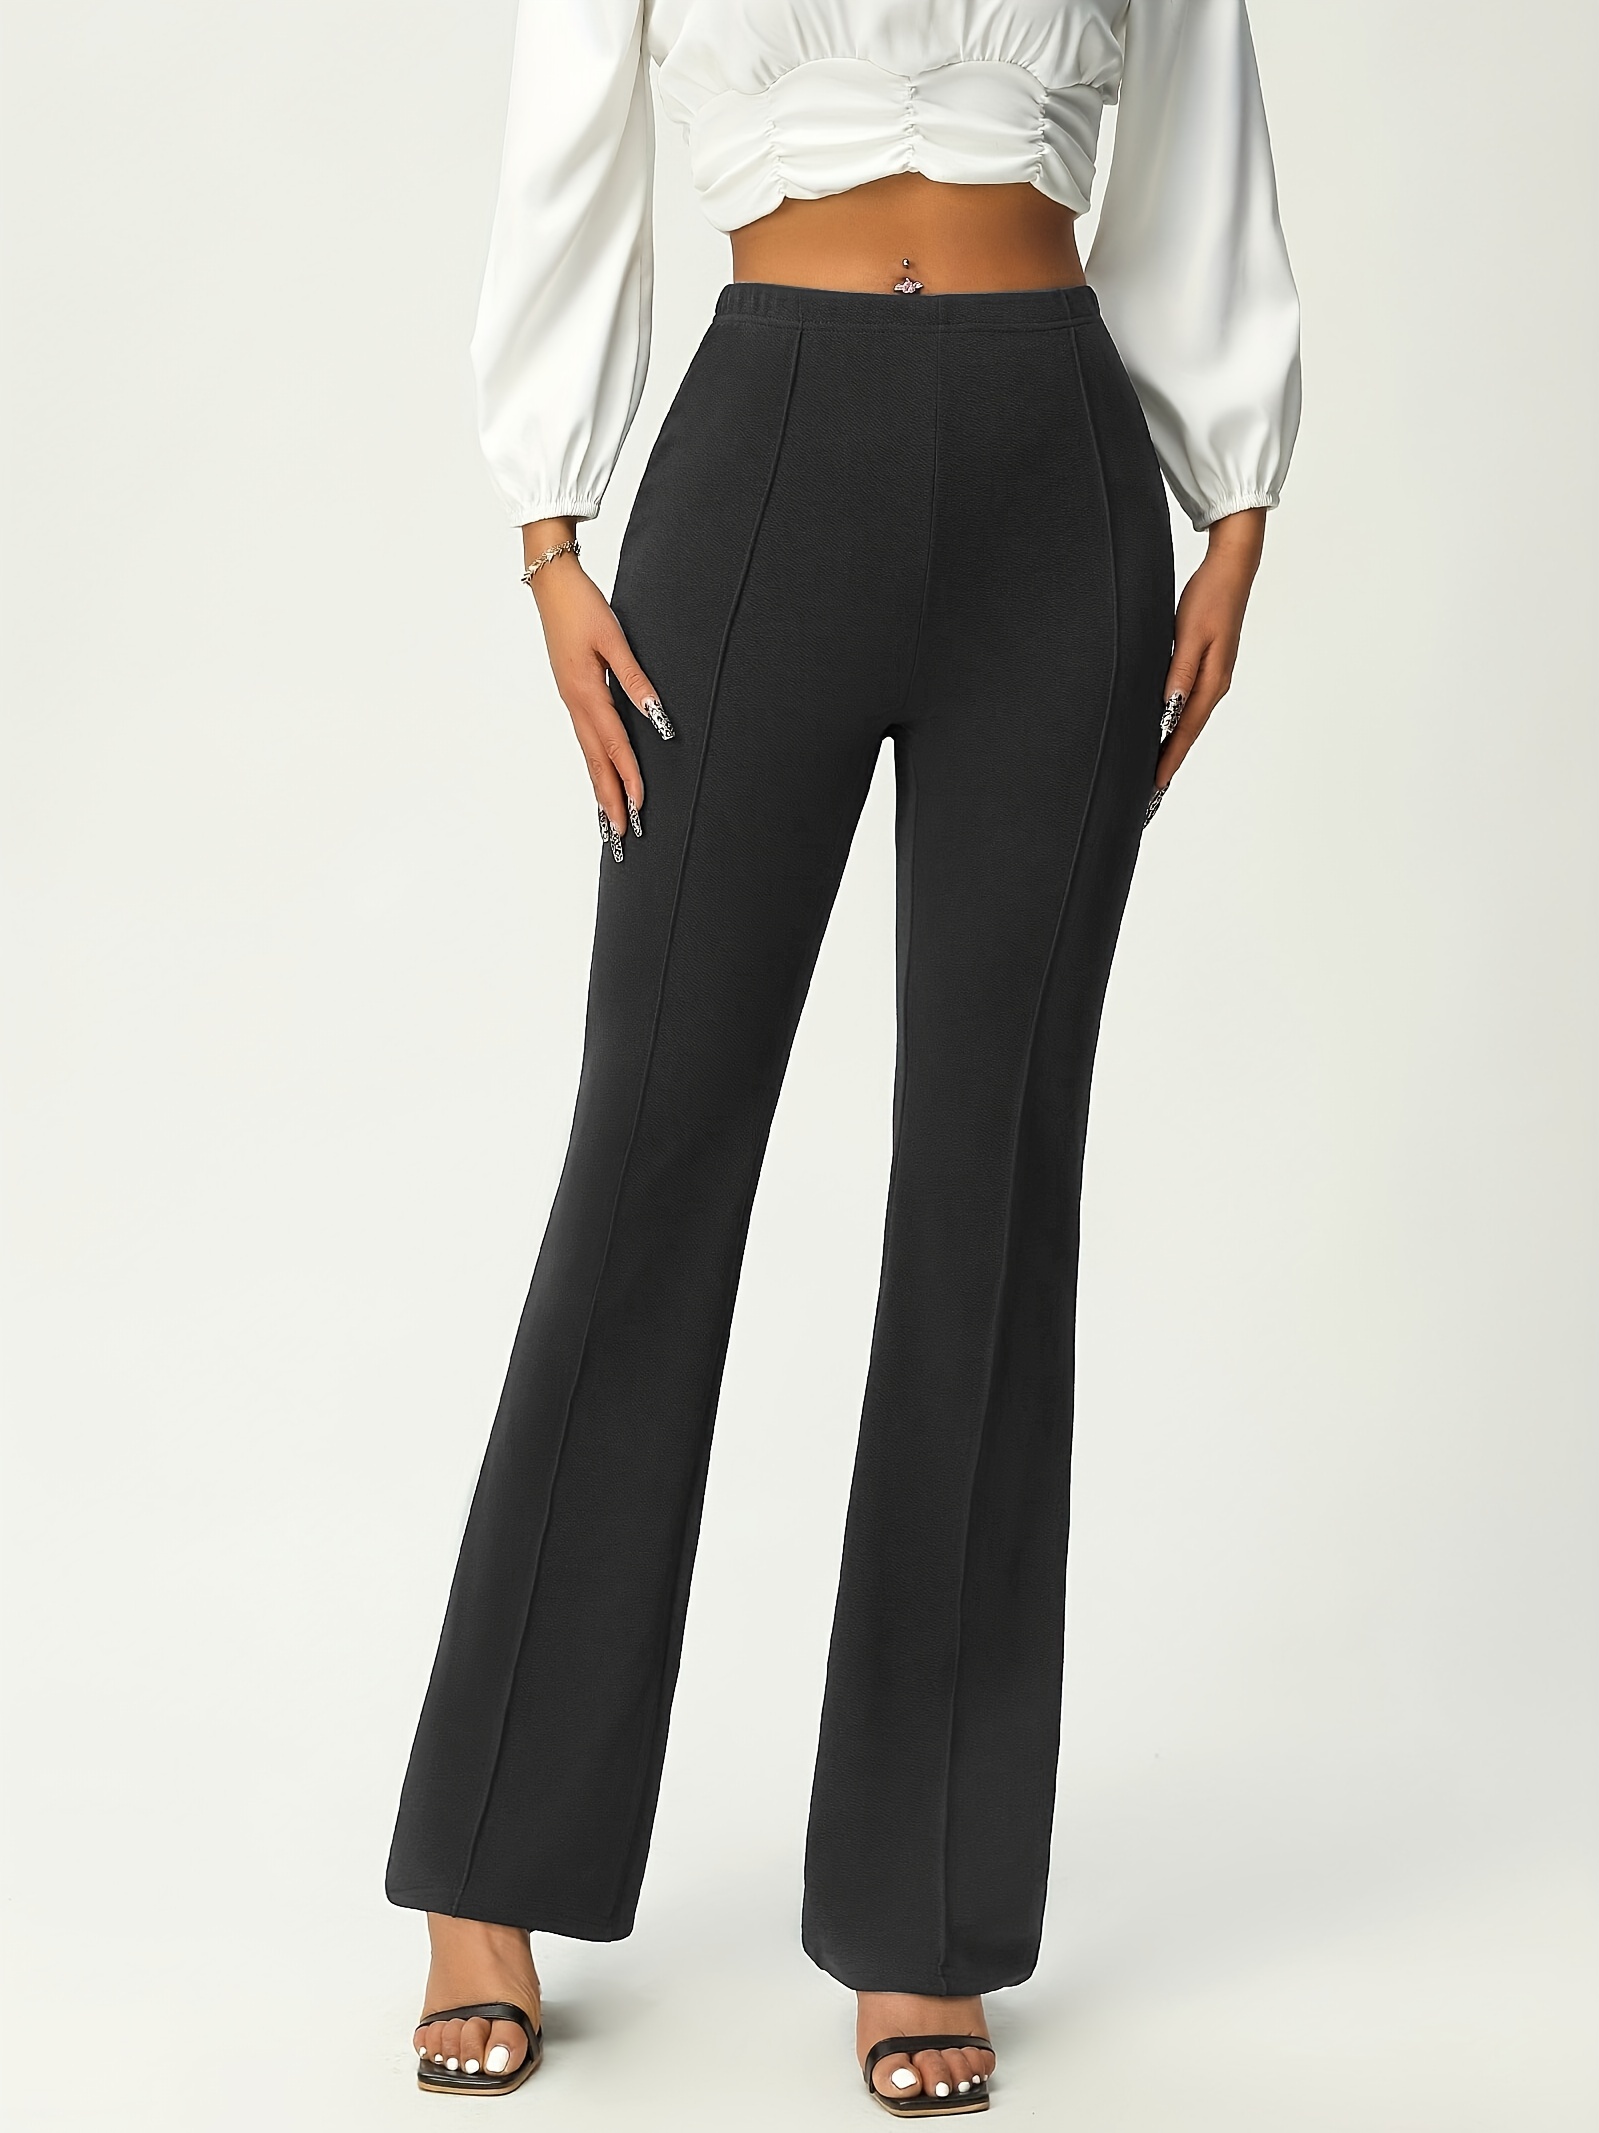 Tall Lia Flare Dress Pants for Women in Black – Search By Inseam